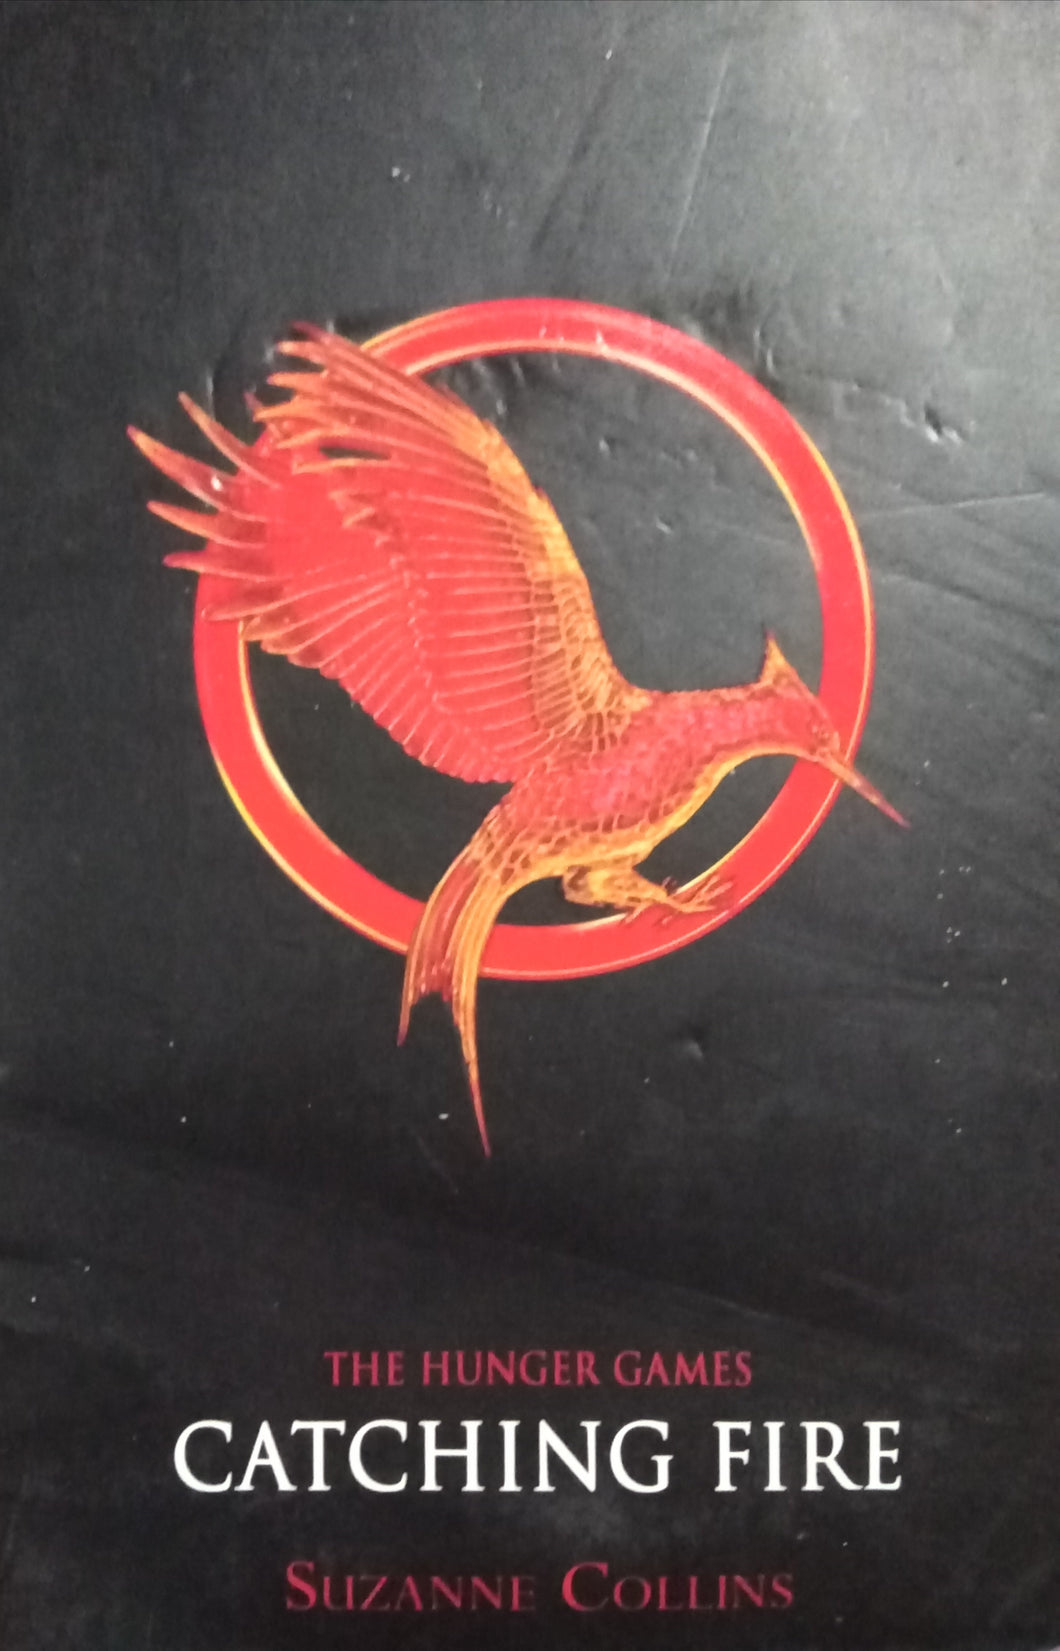 The hunger games: Catching fire By Suzanne Collins